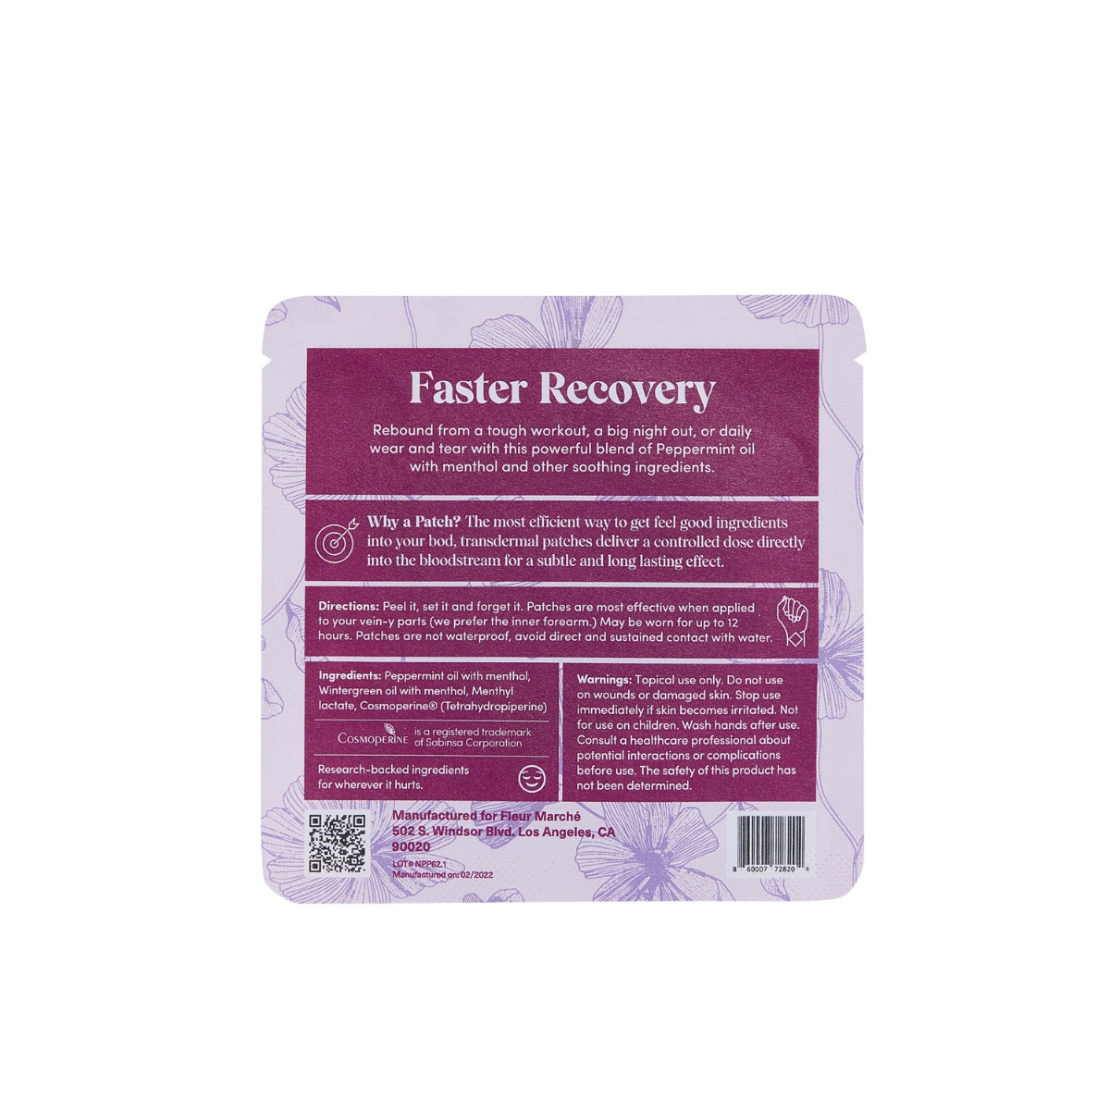 Bytox Recovery Patch Review 